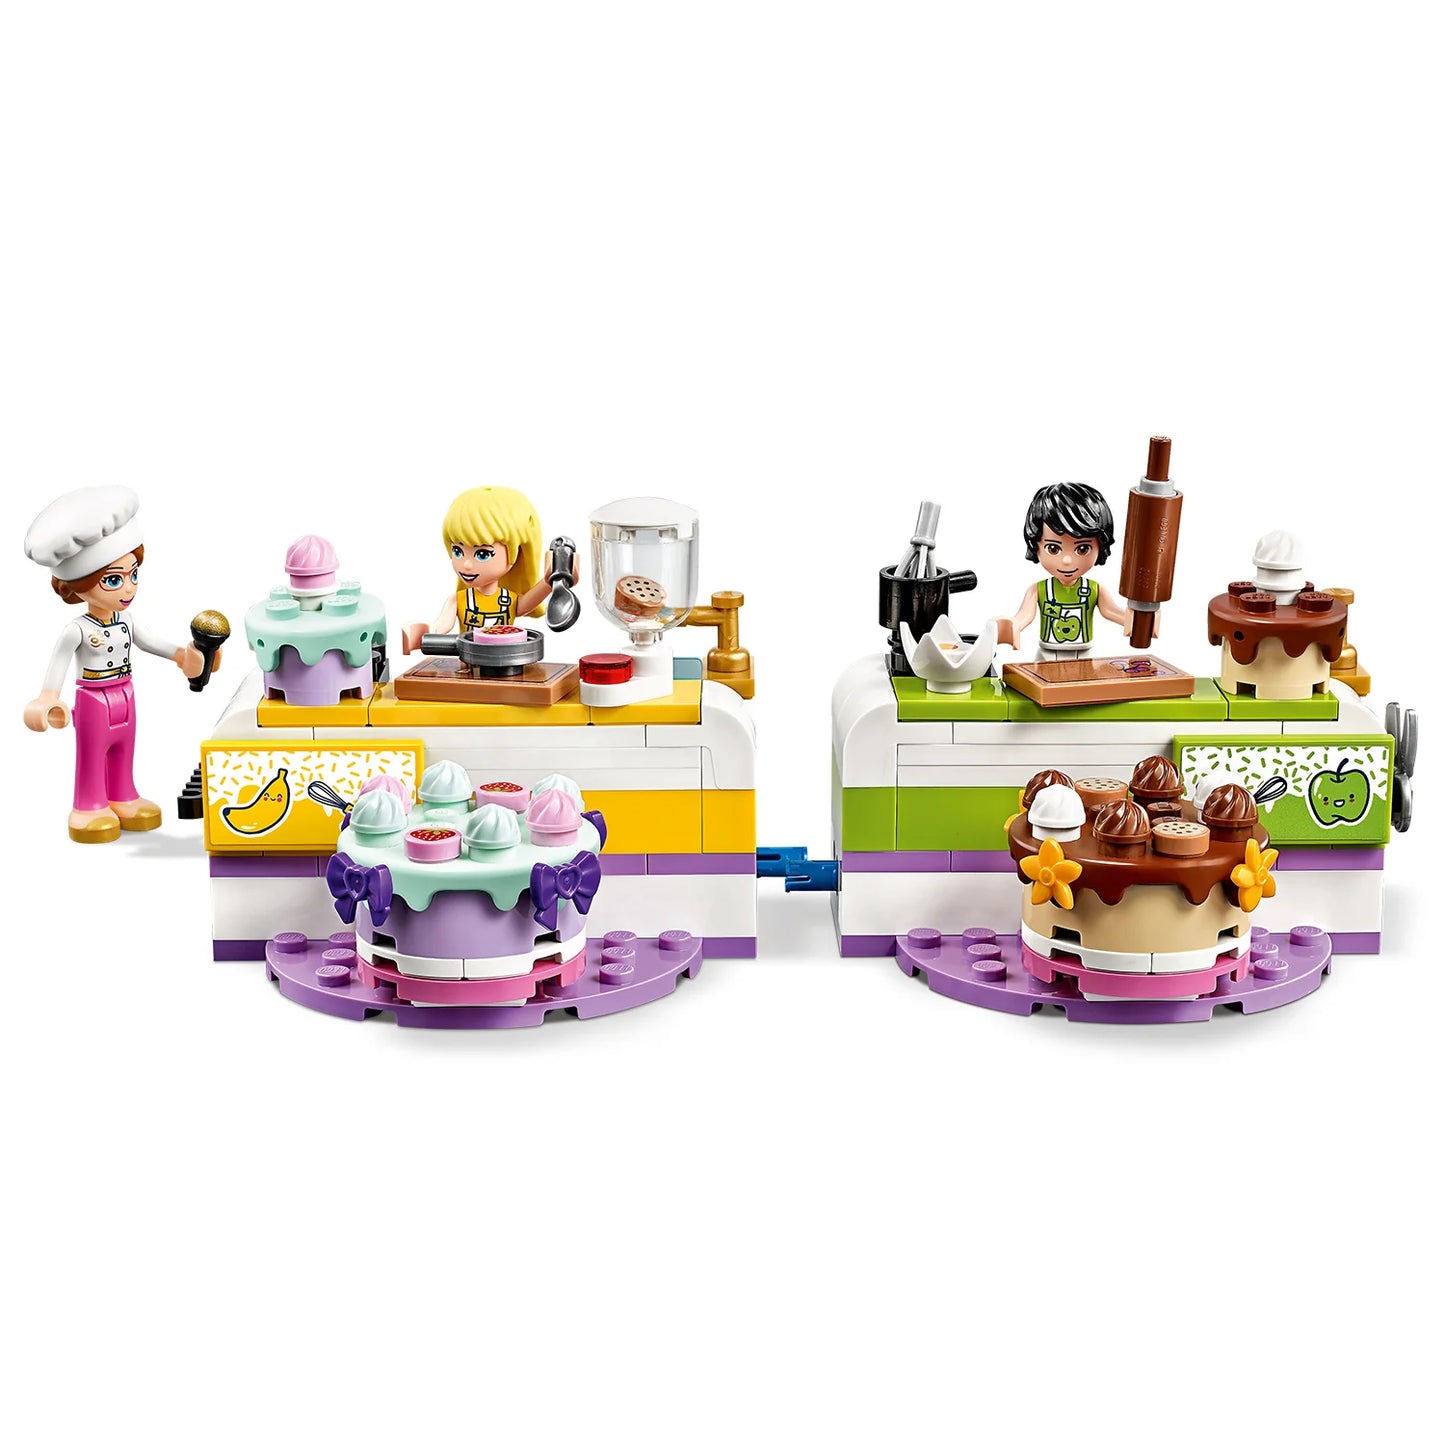 Baking Competition - LEGO Friends